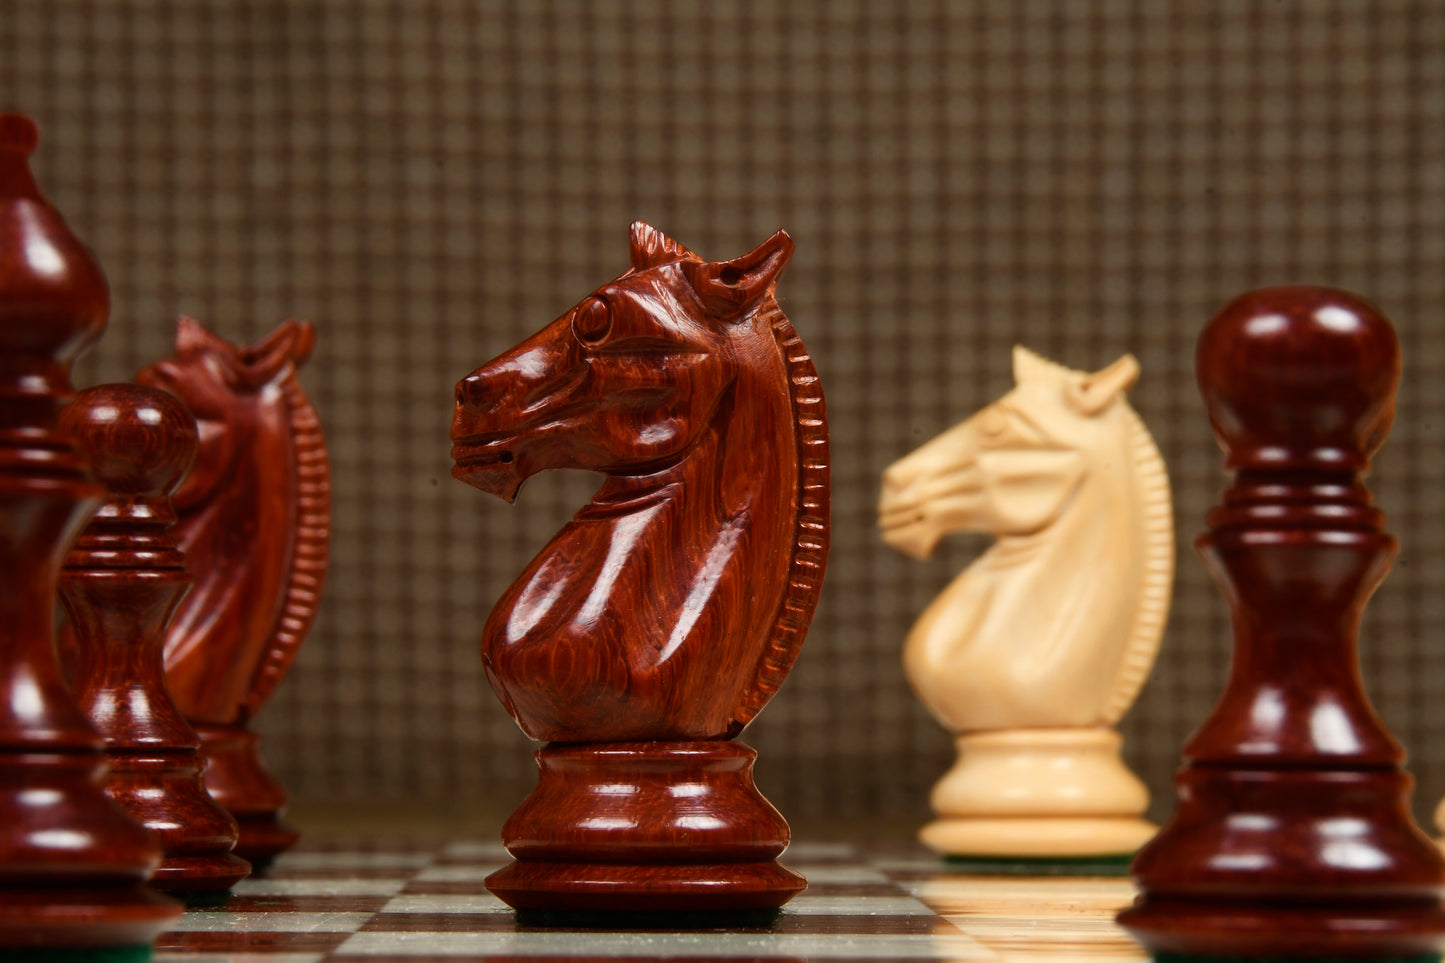 Meghdoot Staunton Series Wooden Chess Pieces in Bud Rose & Box Wood - 3.2" King